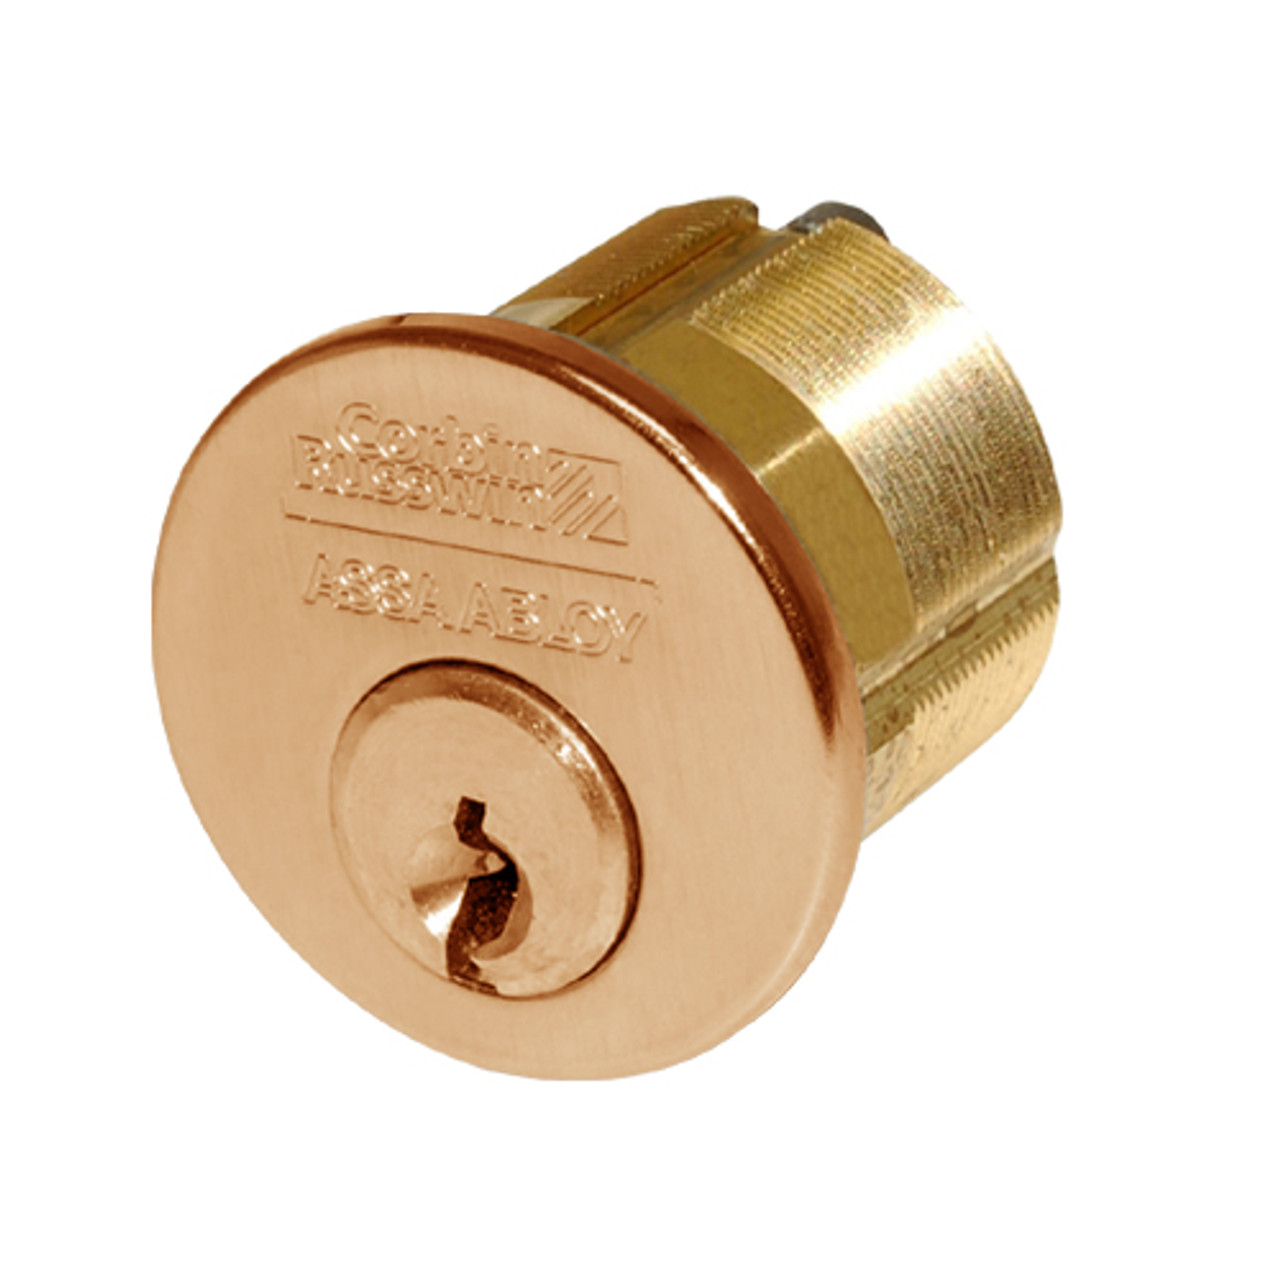 CR1000-200-A02-6-59A1-612 Corbin Conventional Mortise Cylinder for Mortise Lock and DL3000 Deadlocks with Straight Cam in Satin Bronze Finish